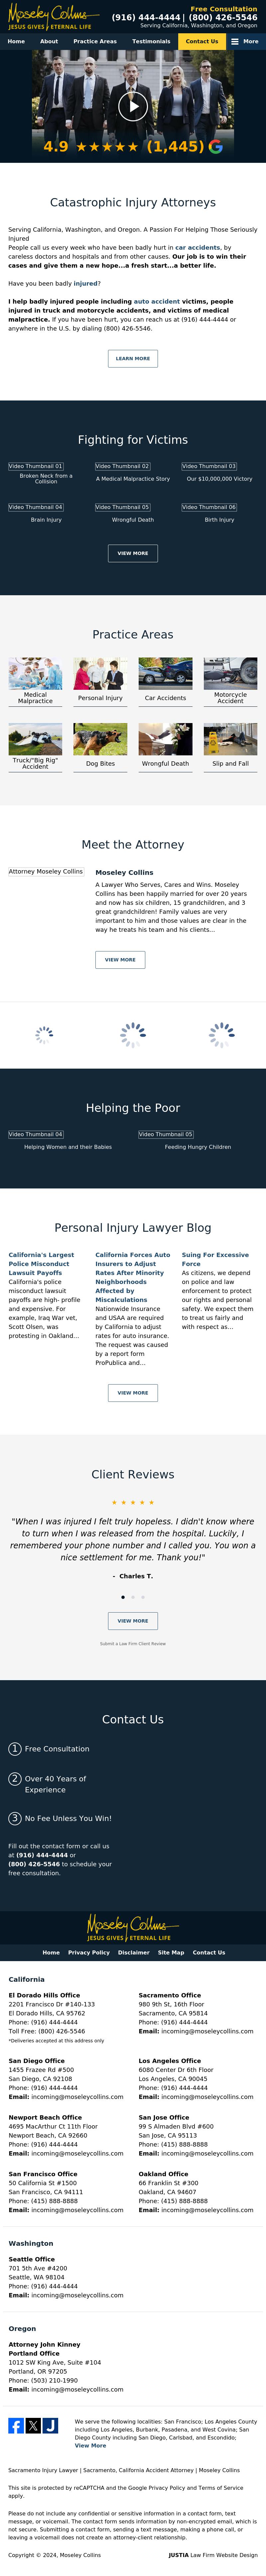 Moseley Collins - San Francisco CA Lawyers